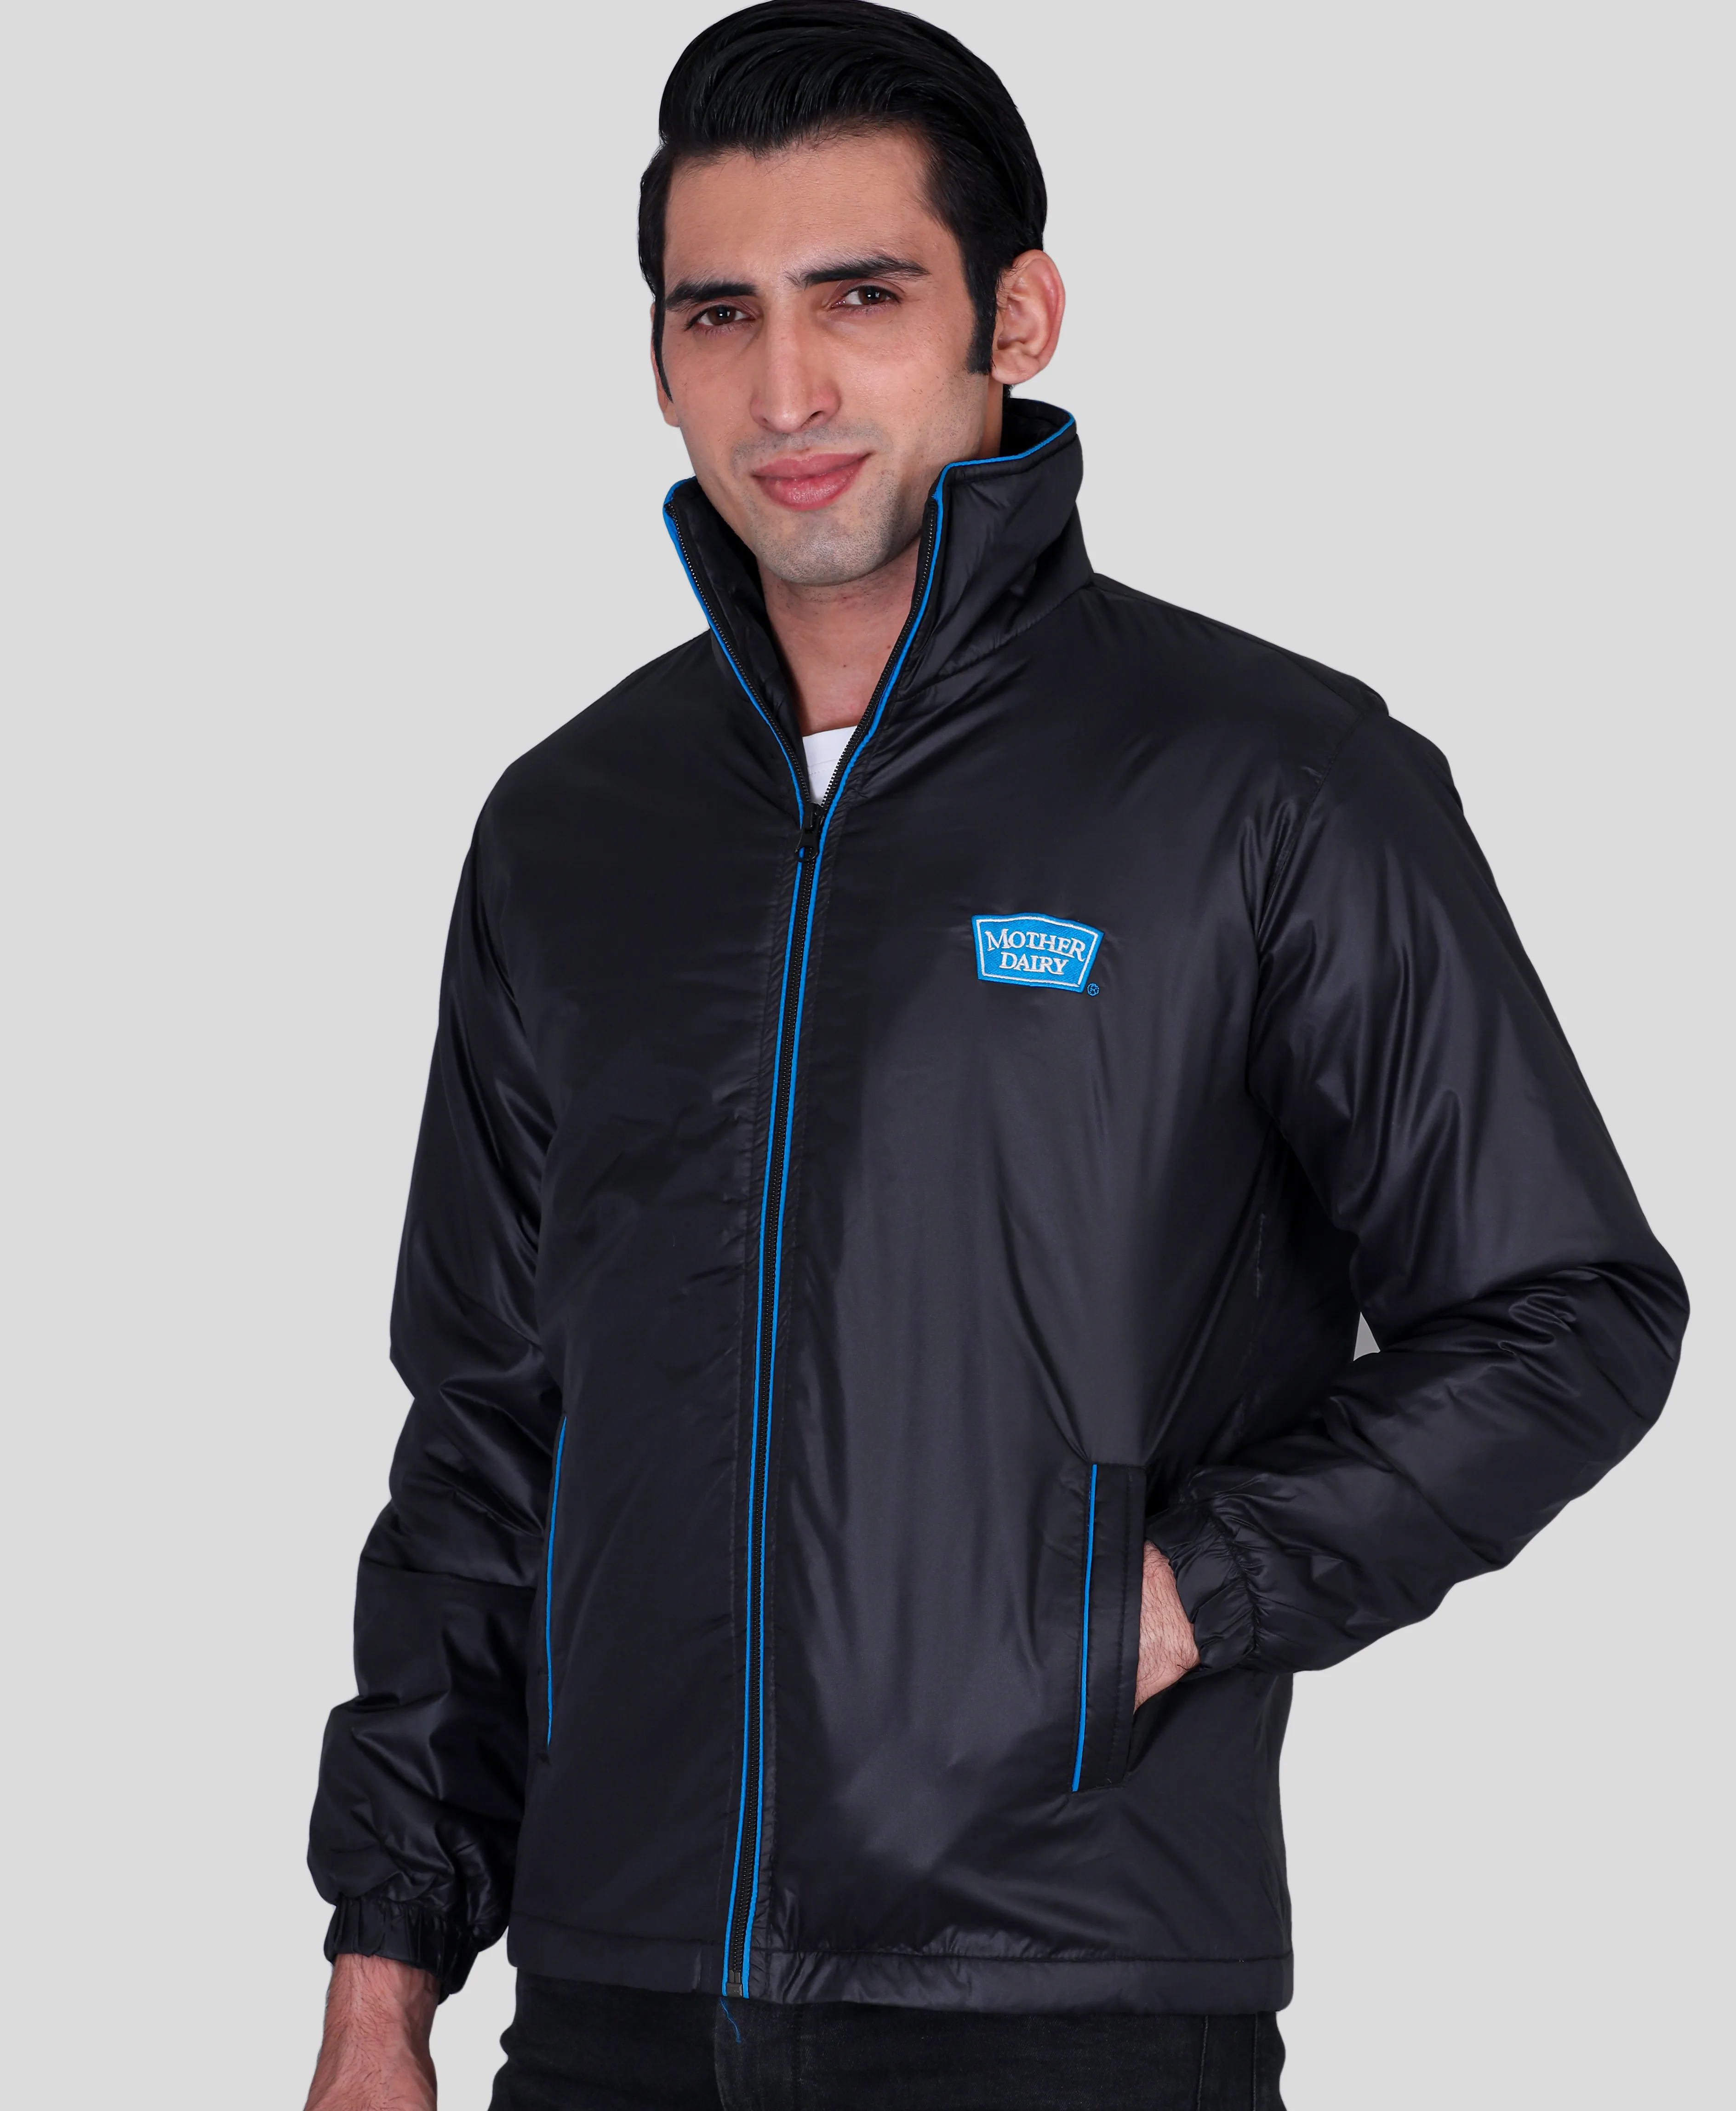 Corporate customized jackets manufacturer